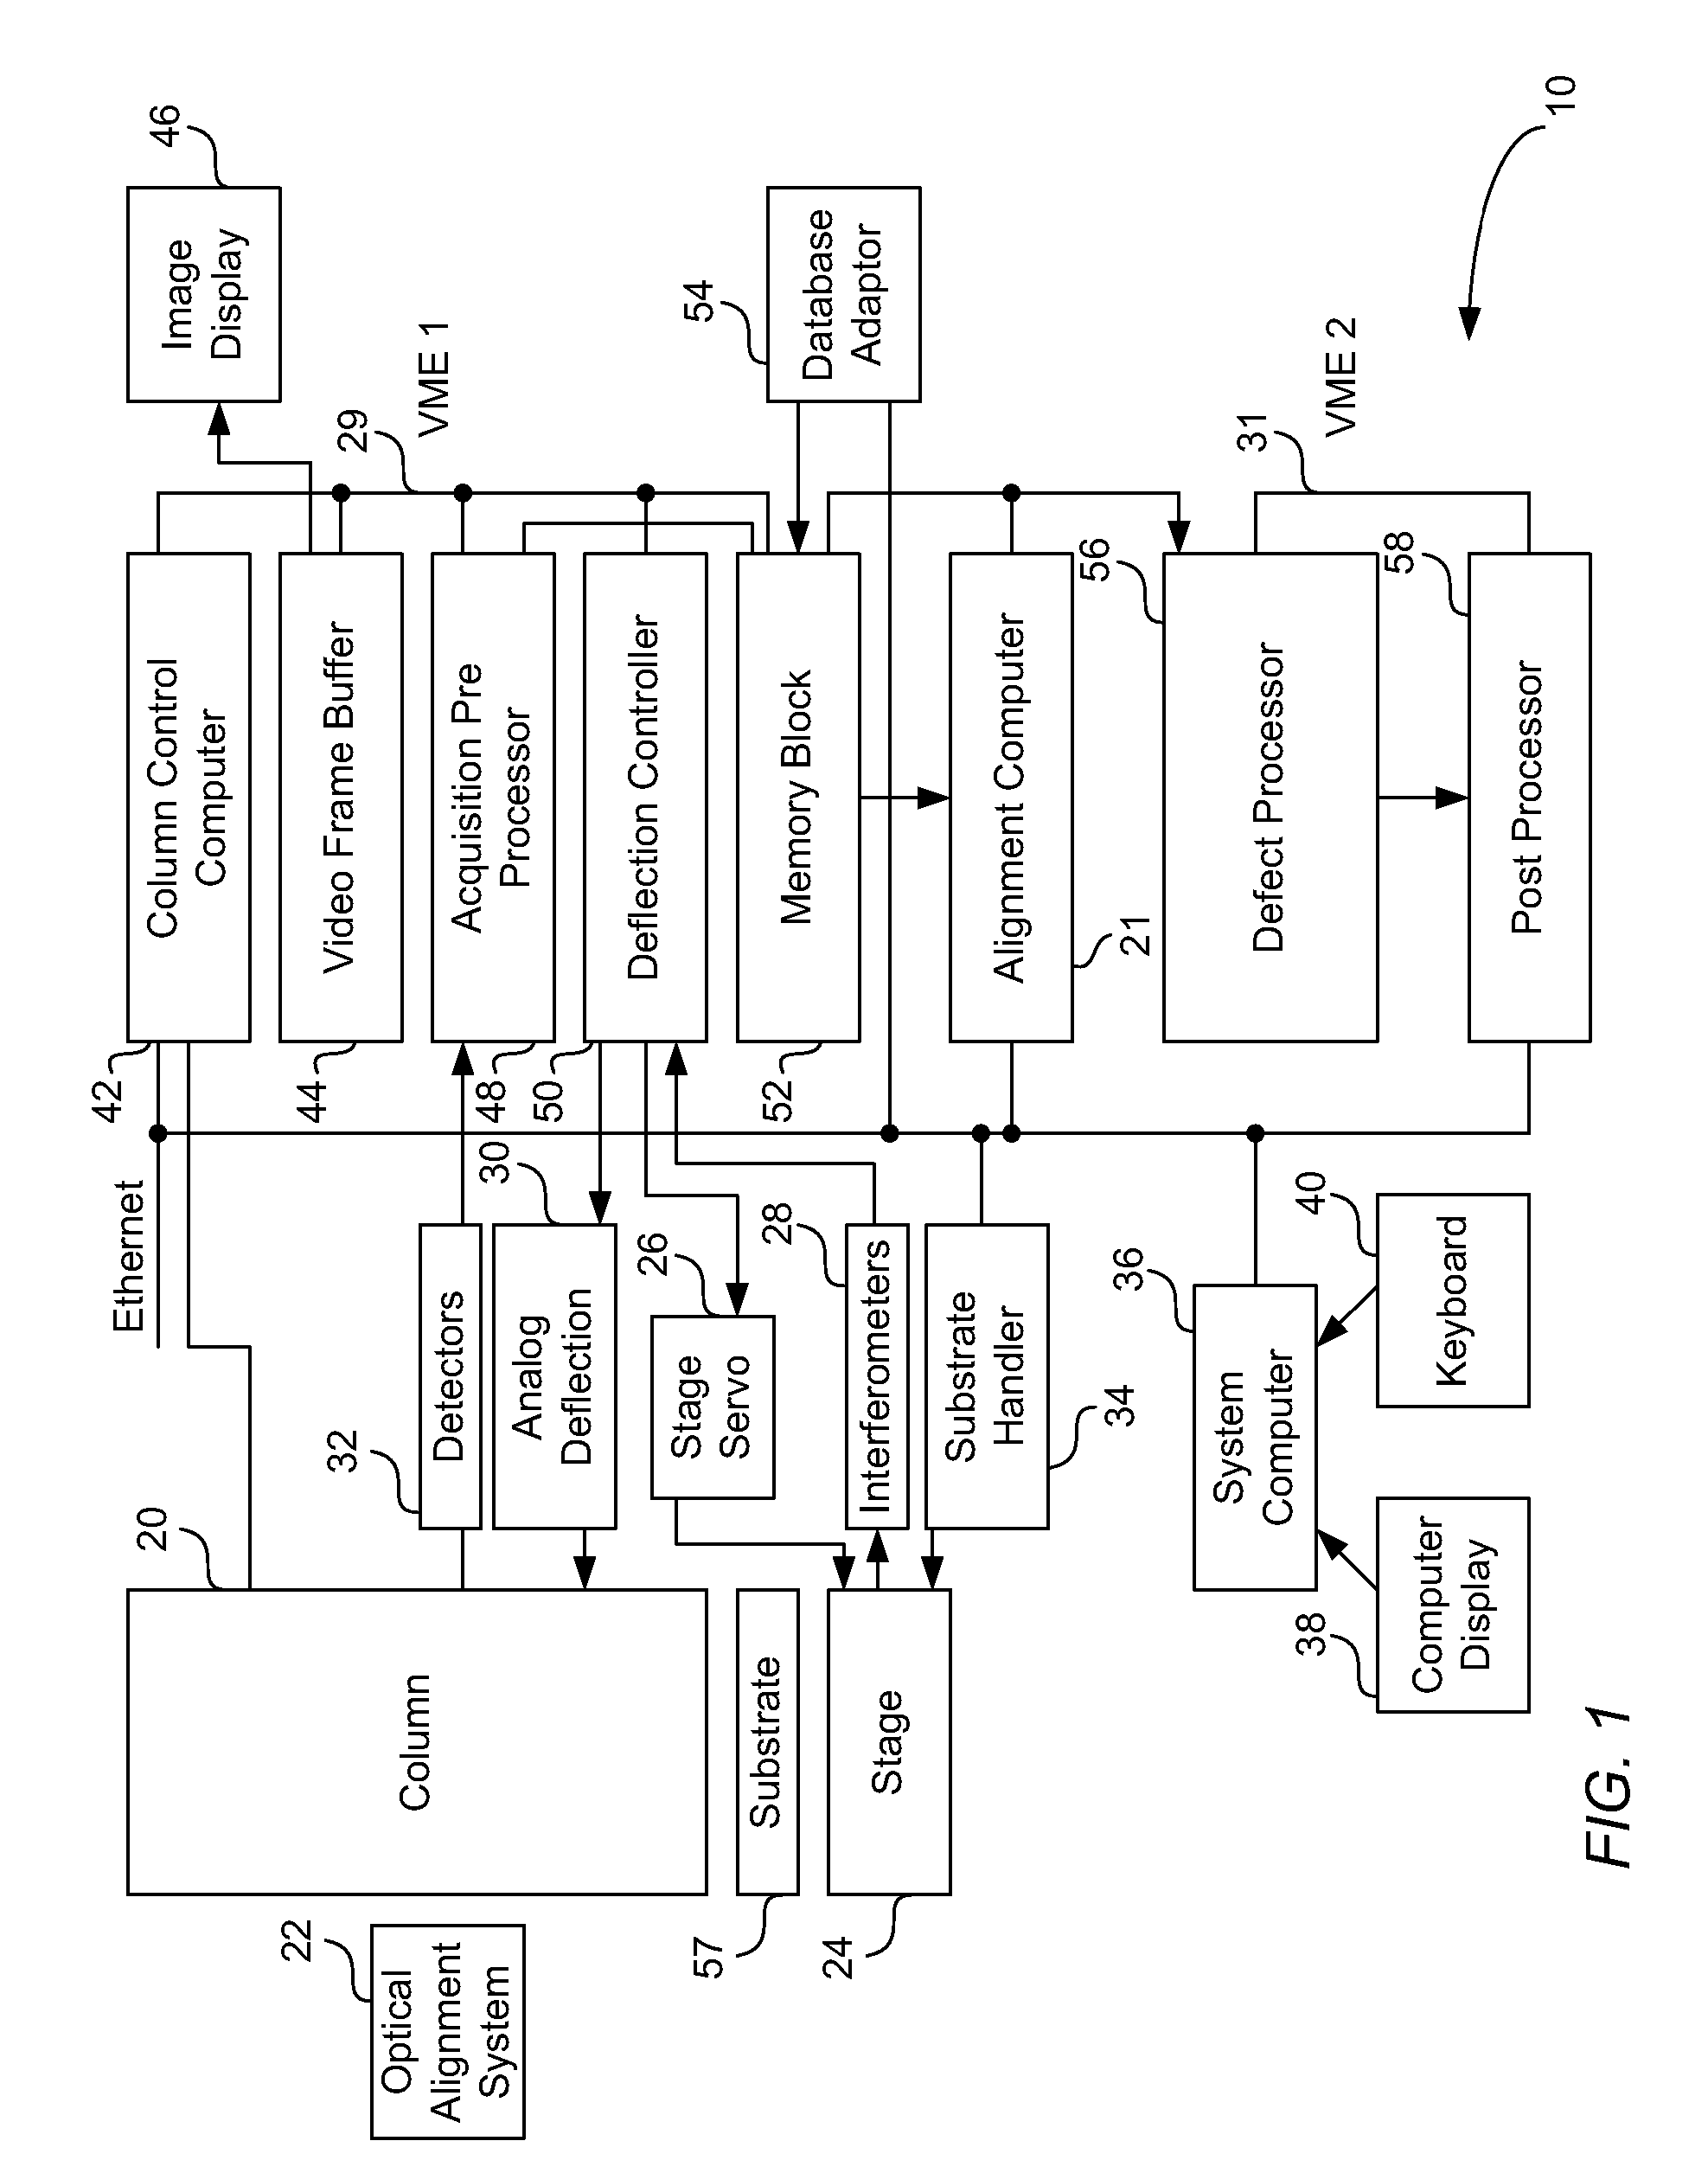 Chemical mechanical polishing test structures and methods for inspecting the same